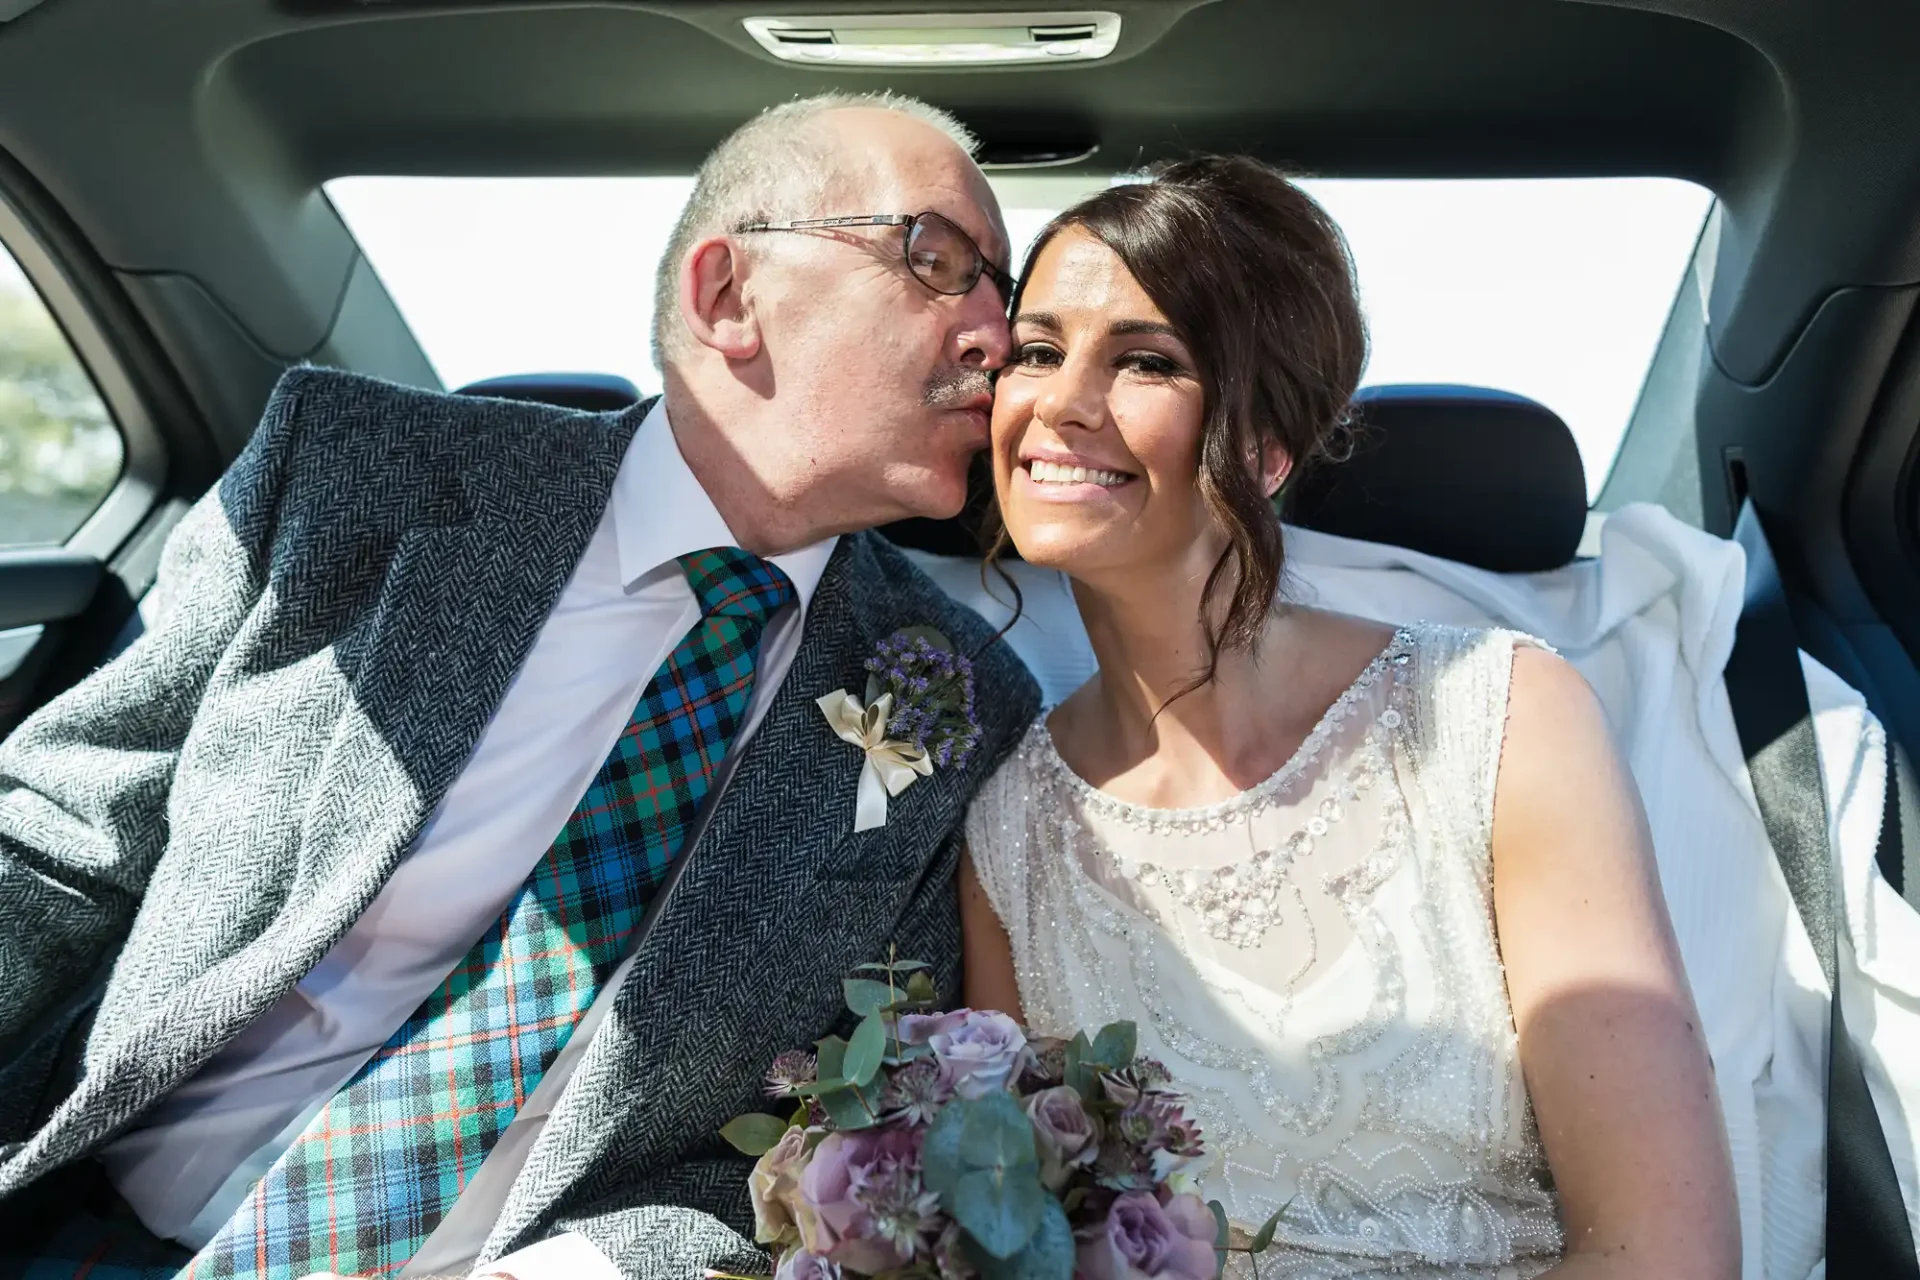 An elderly man in a tartan vest kisses a smiling young woman in a wedding dress, both seated in a car, holding a bouquet.